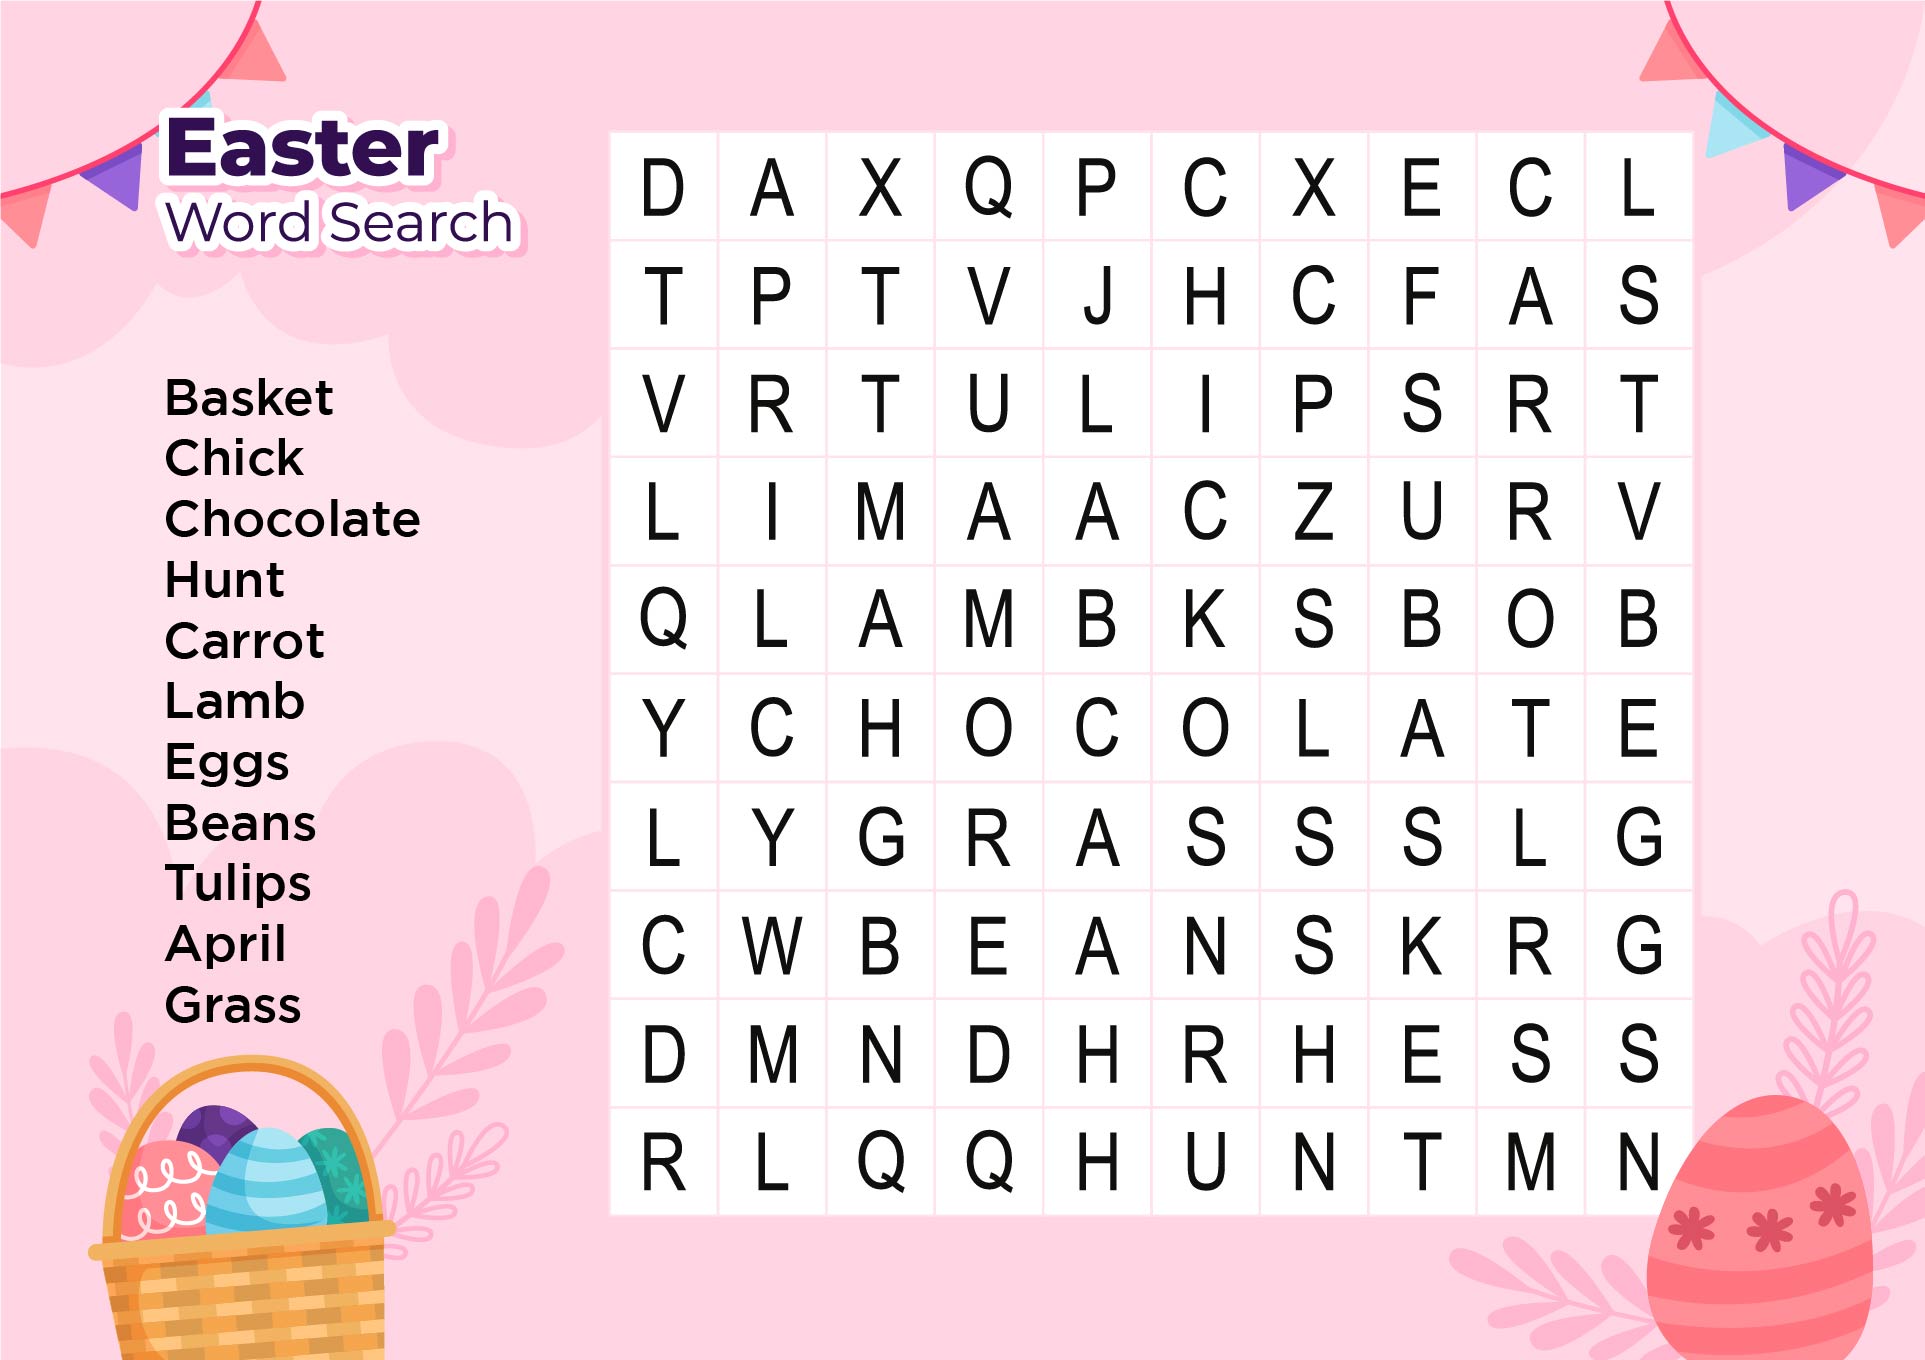 Sunday School Easter Word Search Printable